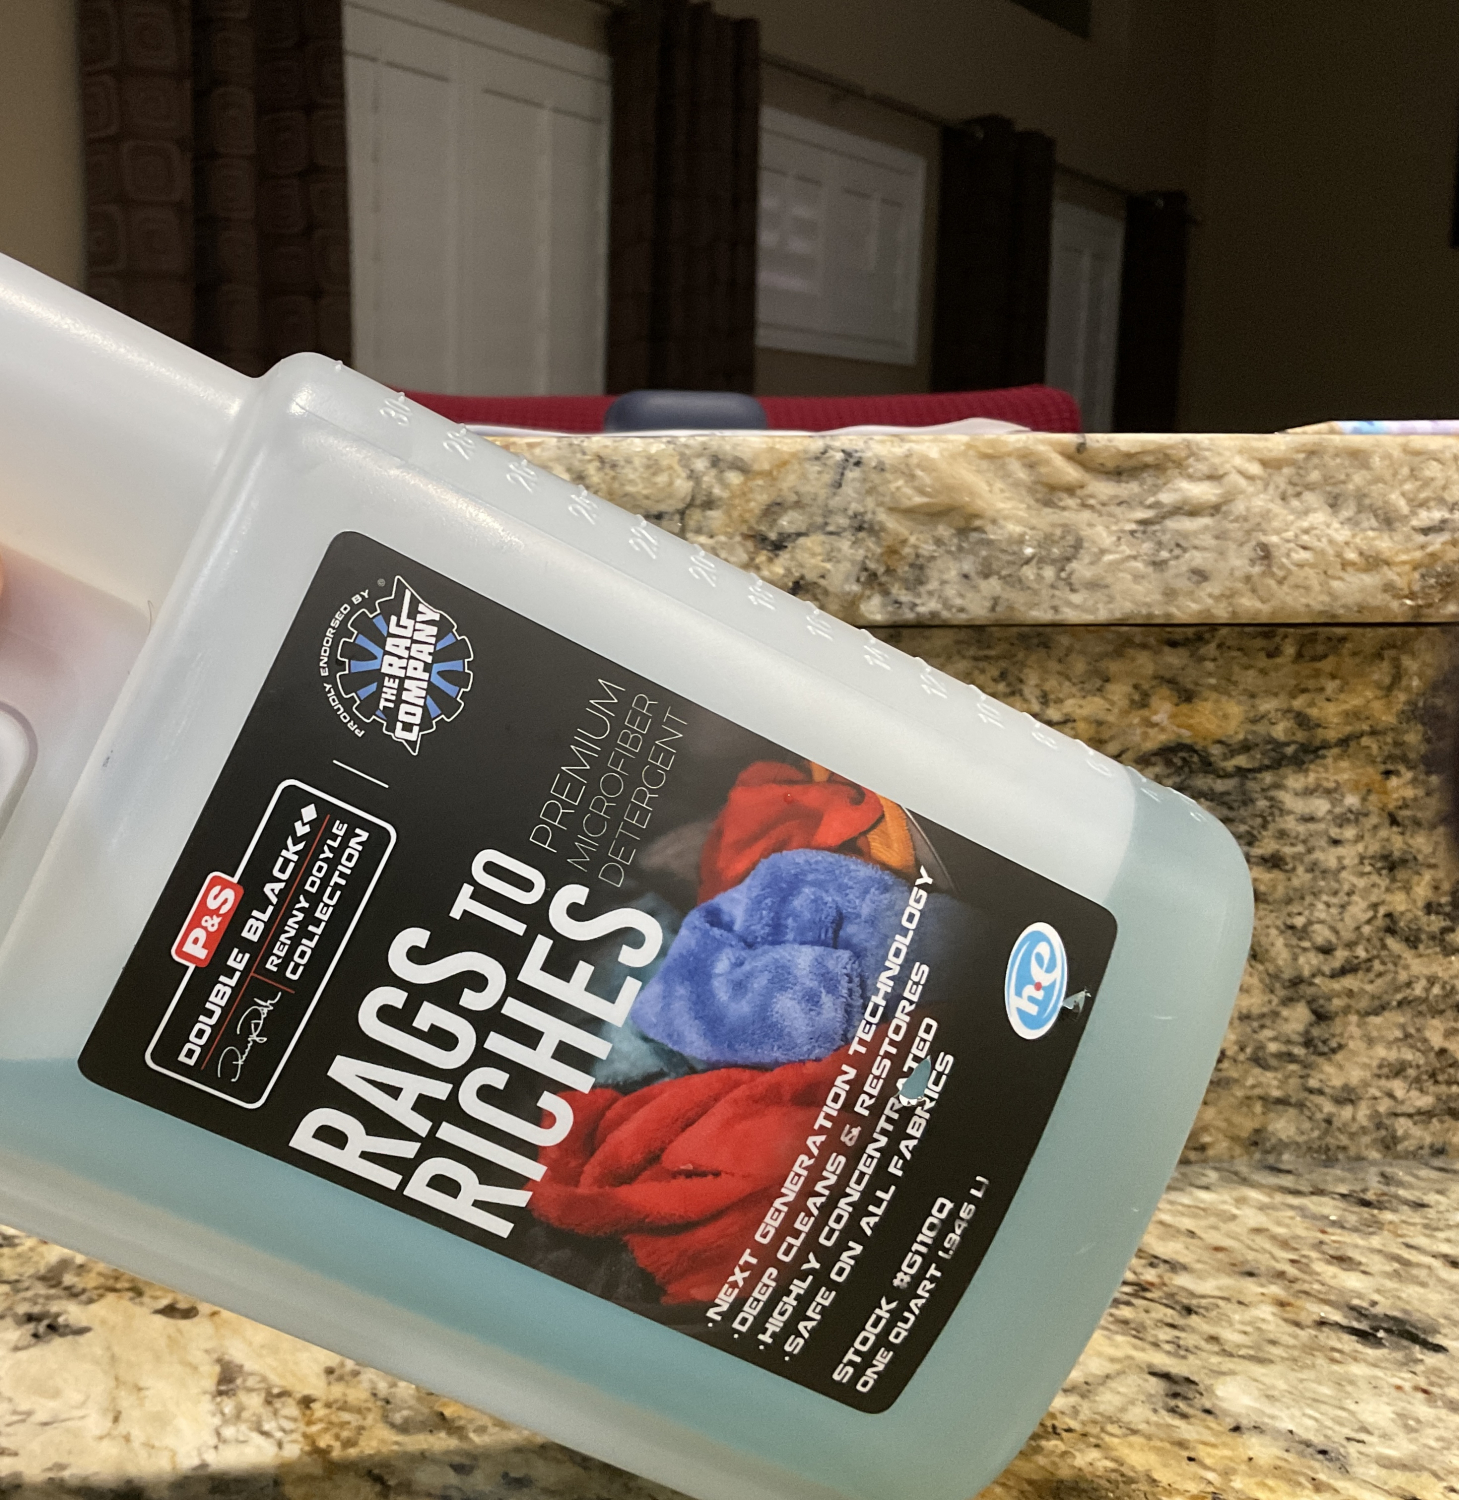  P&S Professional Detail Products - Rags to Riches - Premium Microfiber  Detergent, Deep Cleans and Restores, Safe on All Fabrics, Highly  Concentrated, Next Generation Cleaning Technology (1 Quart) : Industrial &  Scientific